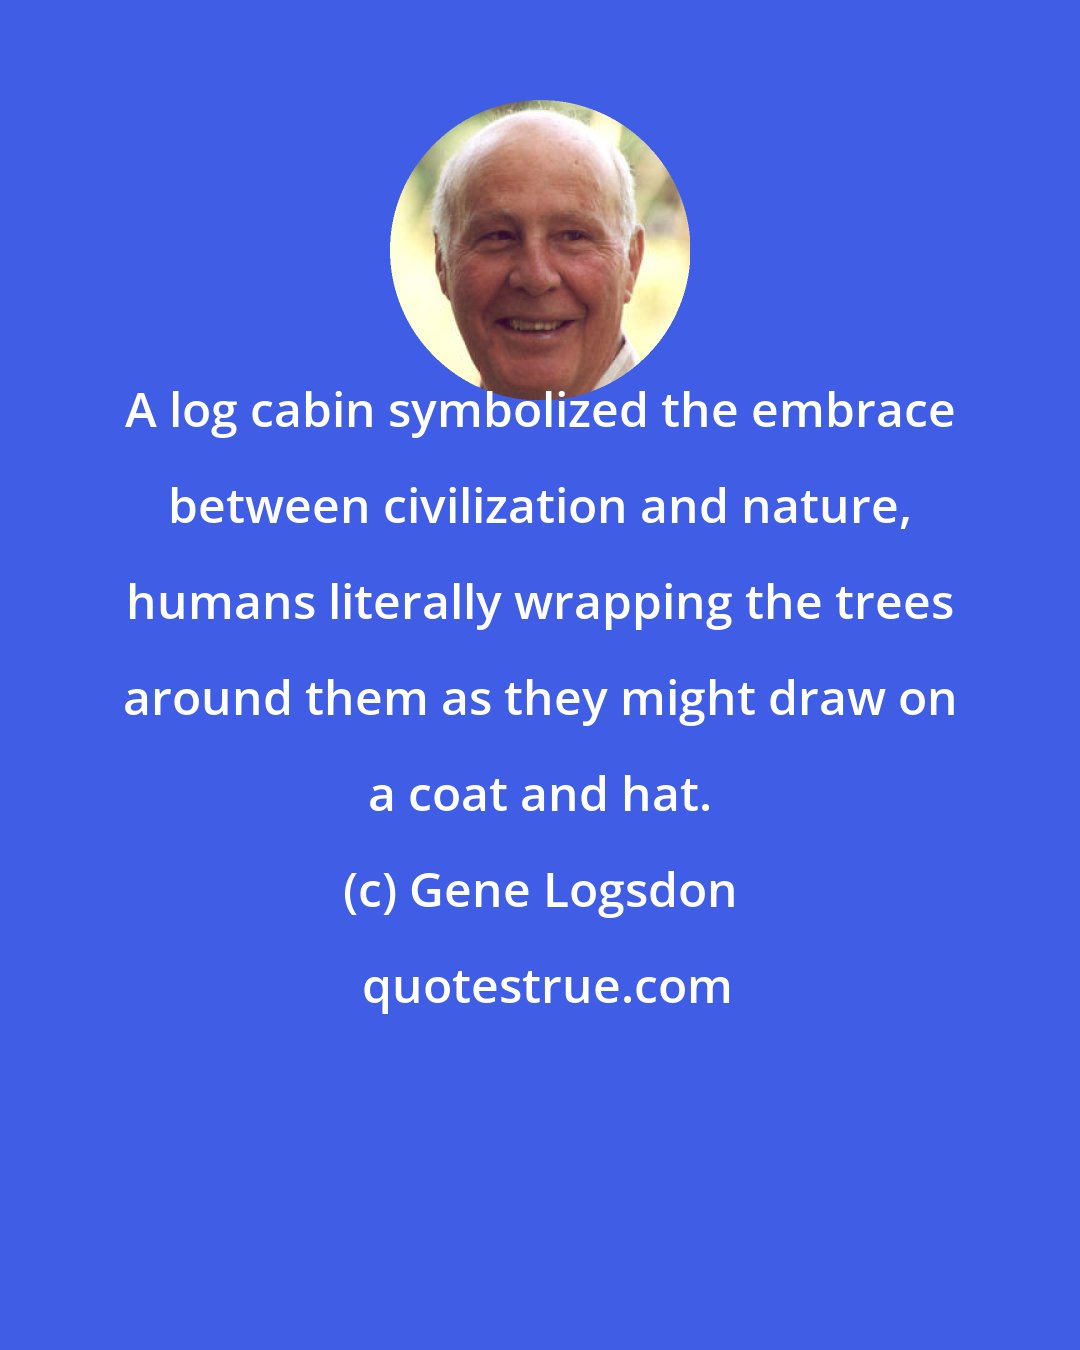 Gene Logsdon: A log cabin symbolized the embrace between civilization and nature, humans literally wrapping the trees around them as they might draw on a coat and hat.